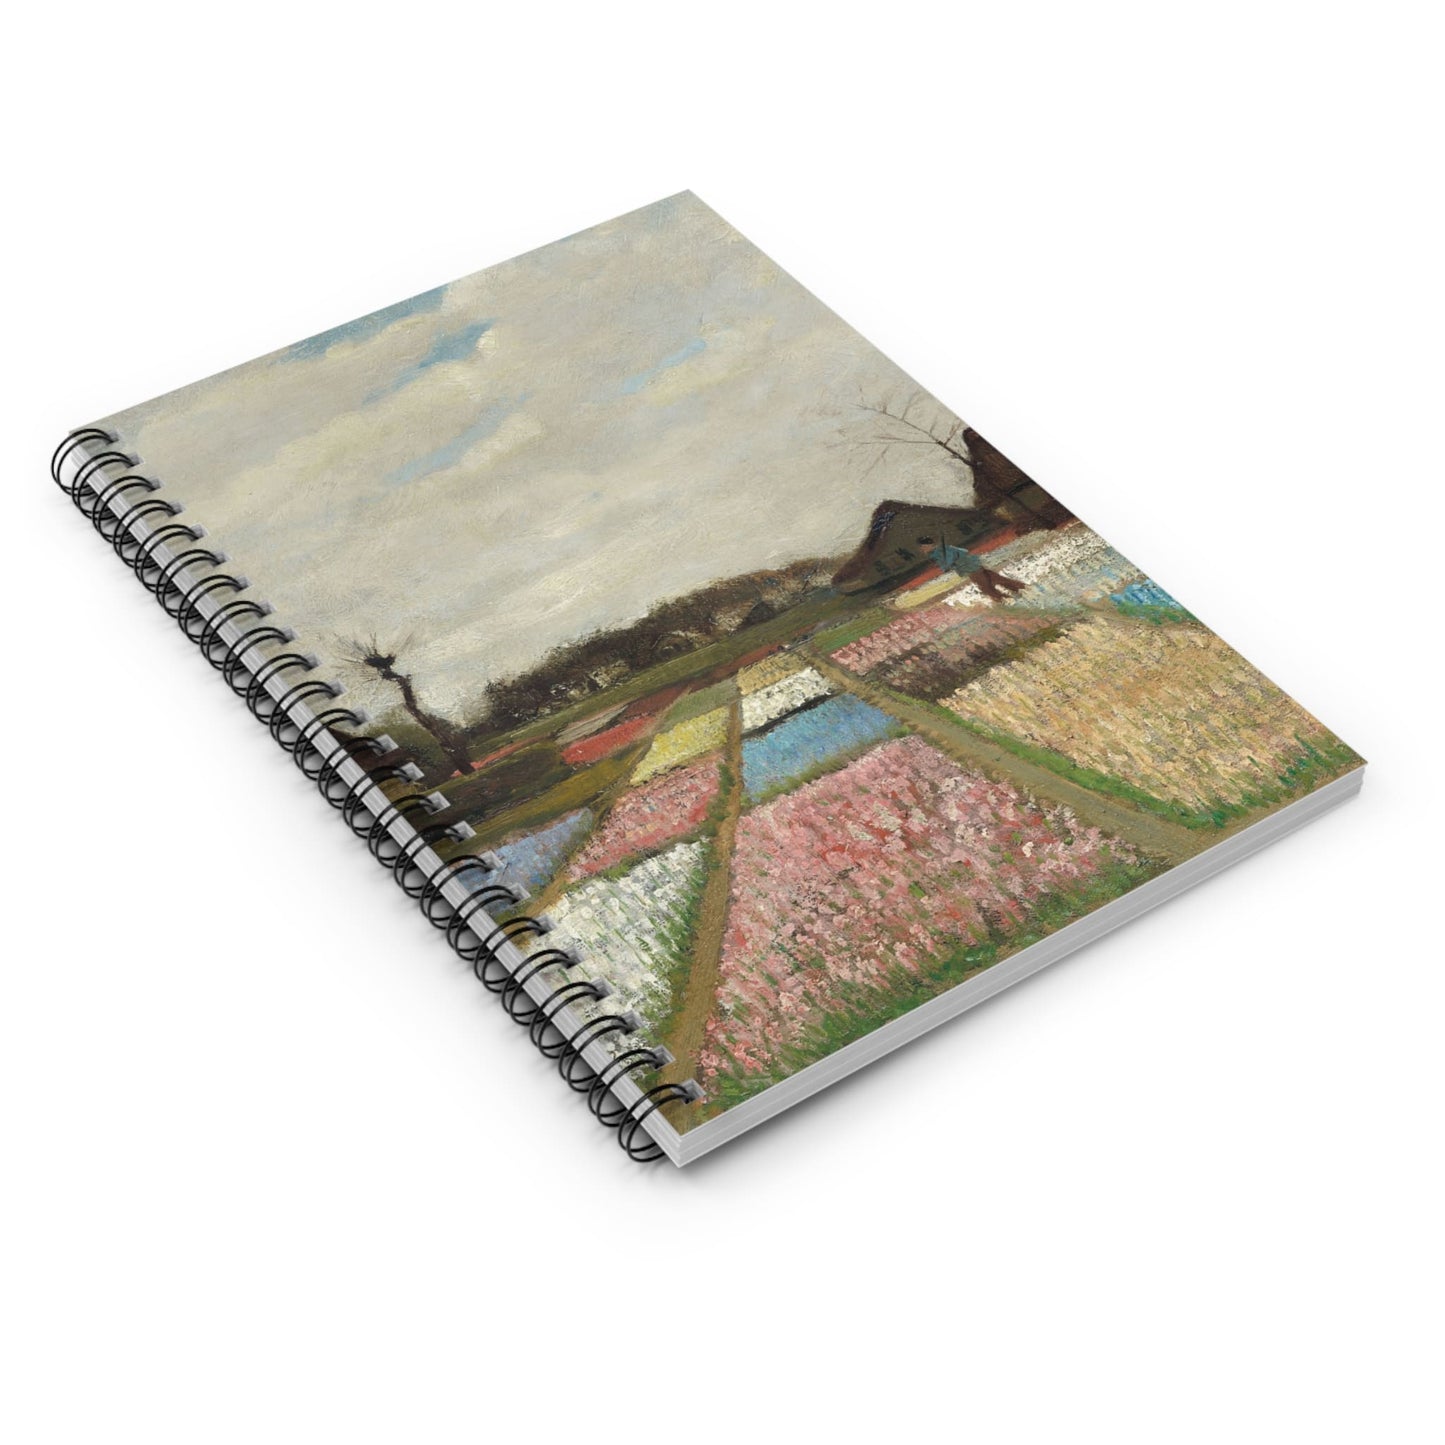 Floral Landscape Spiral Notebook Laying Flat on White Surface